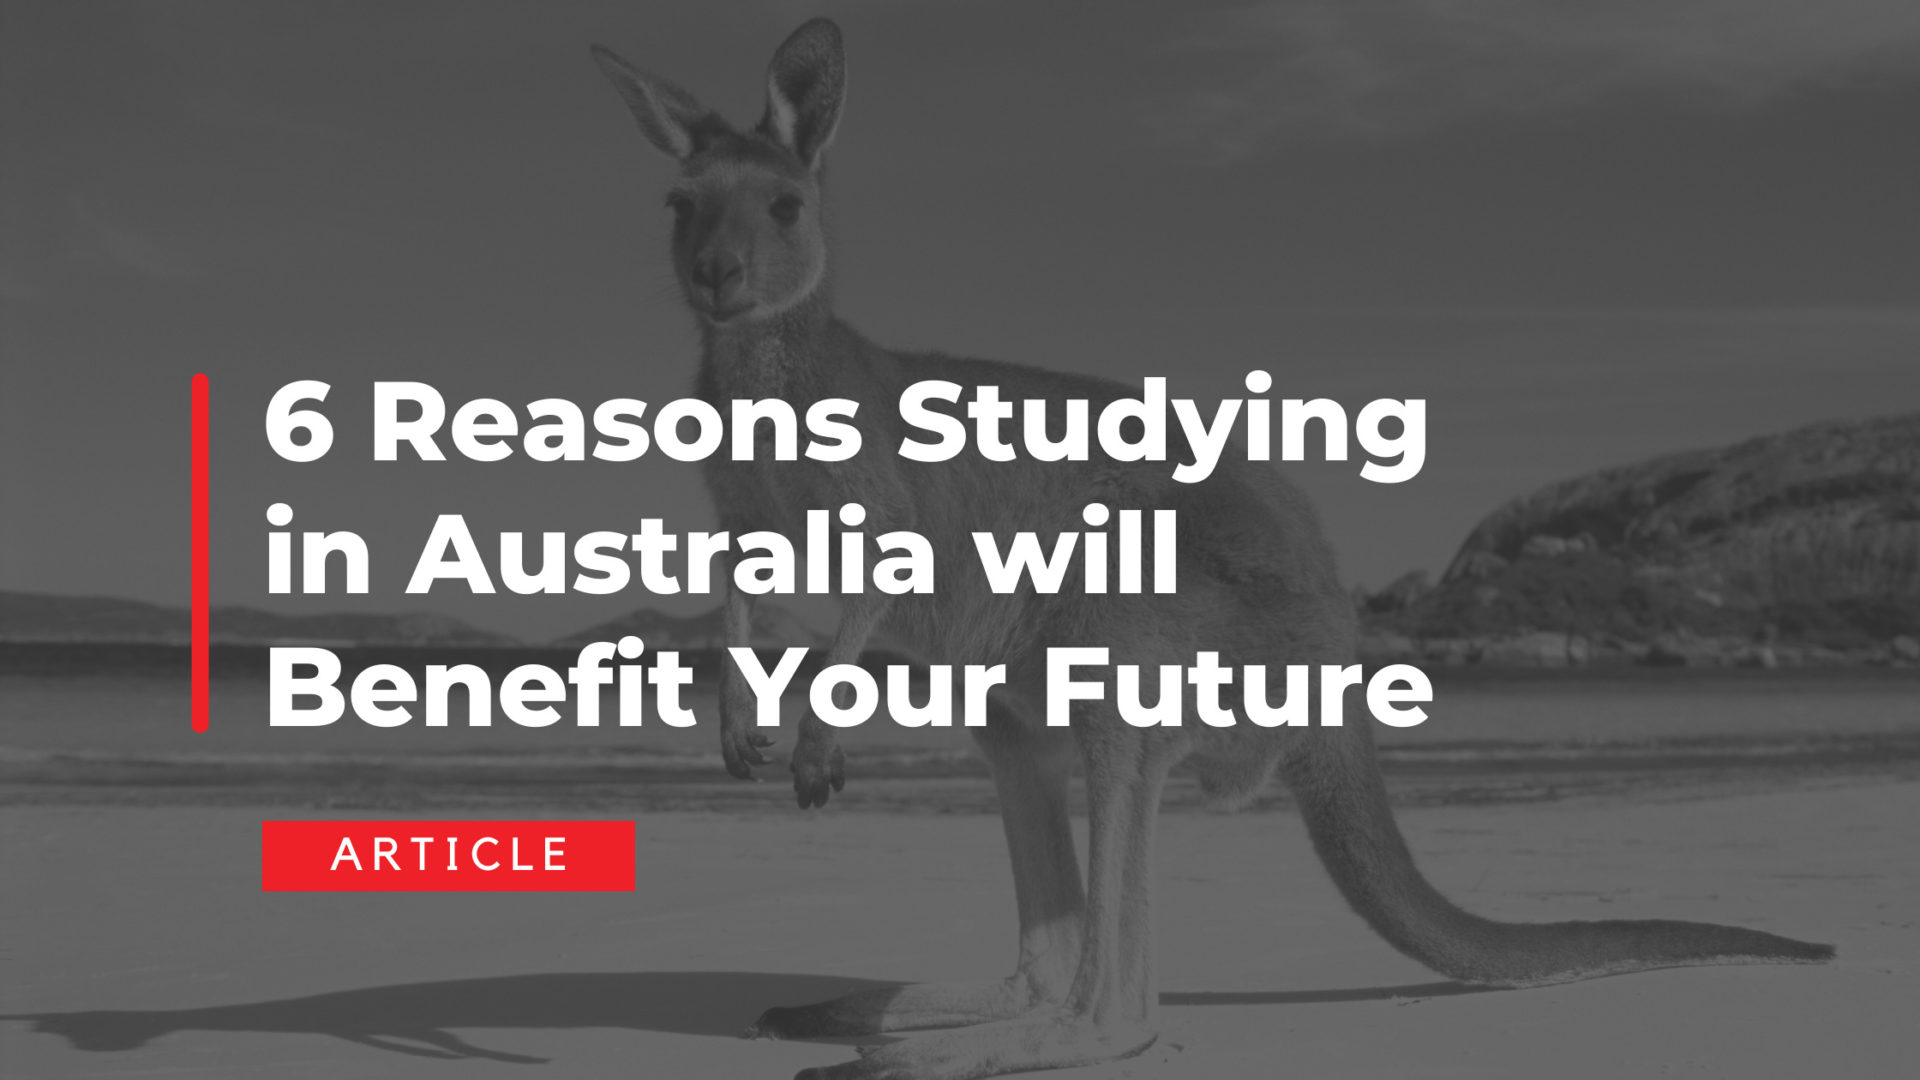 6 Reasons Studying in Australia will Benefit Your Future